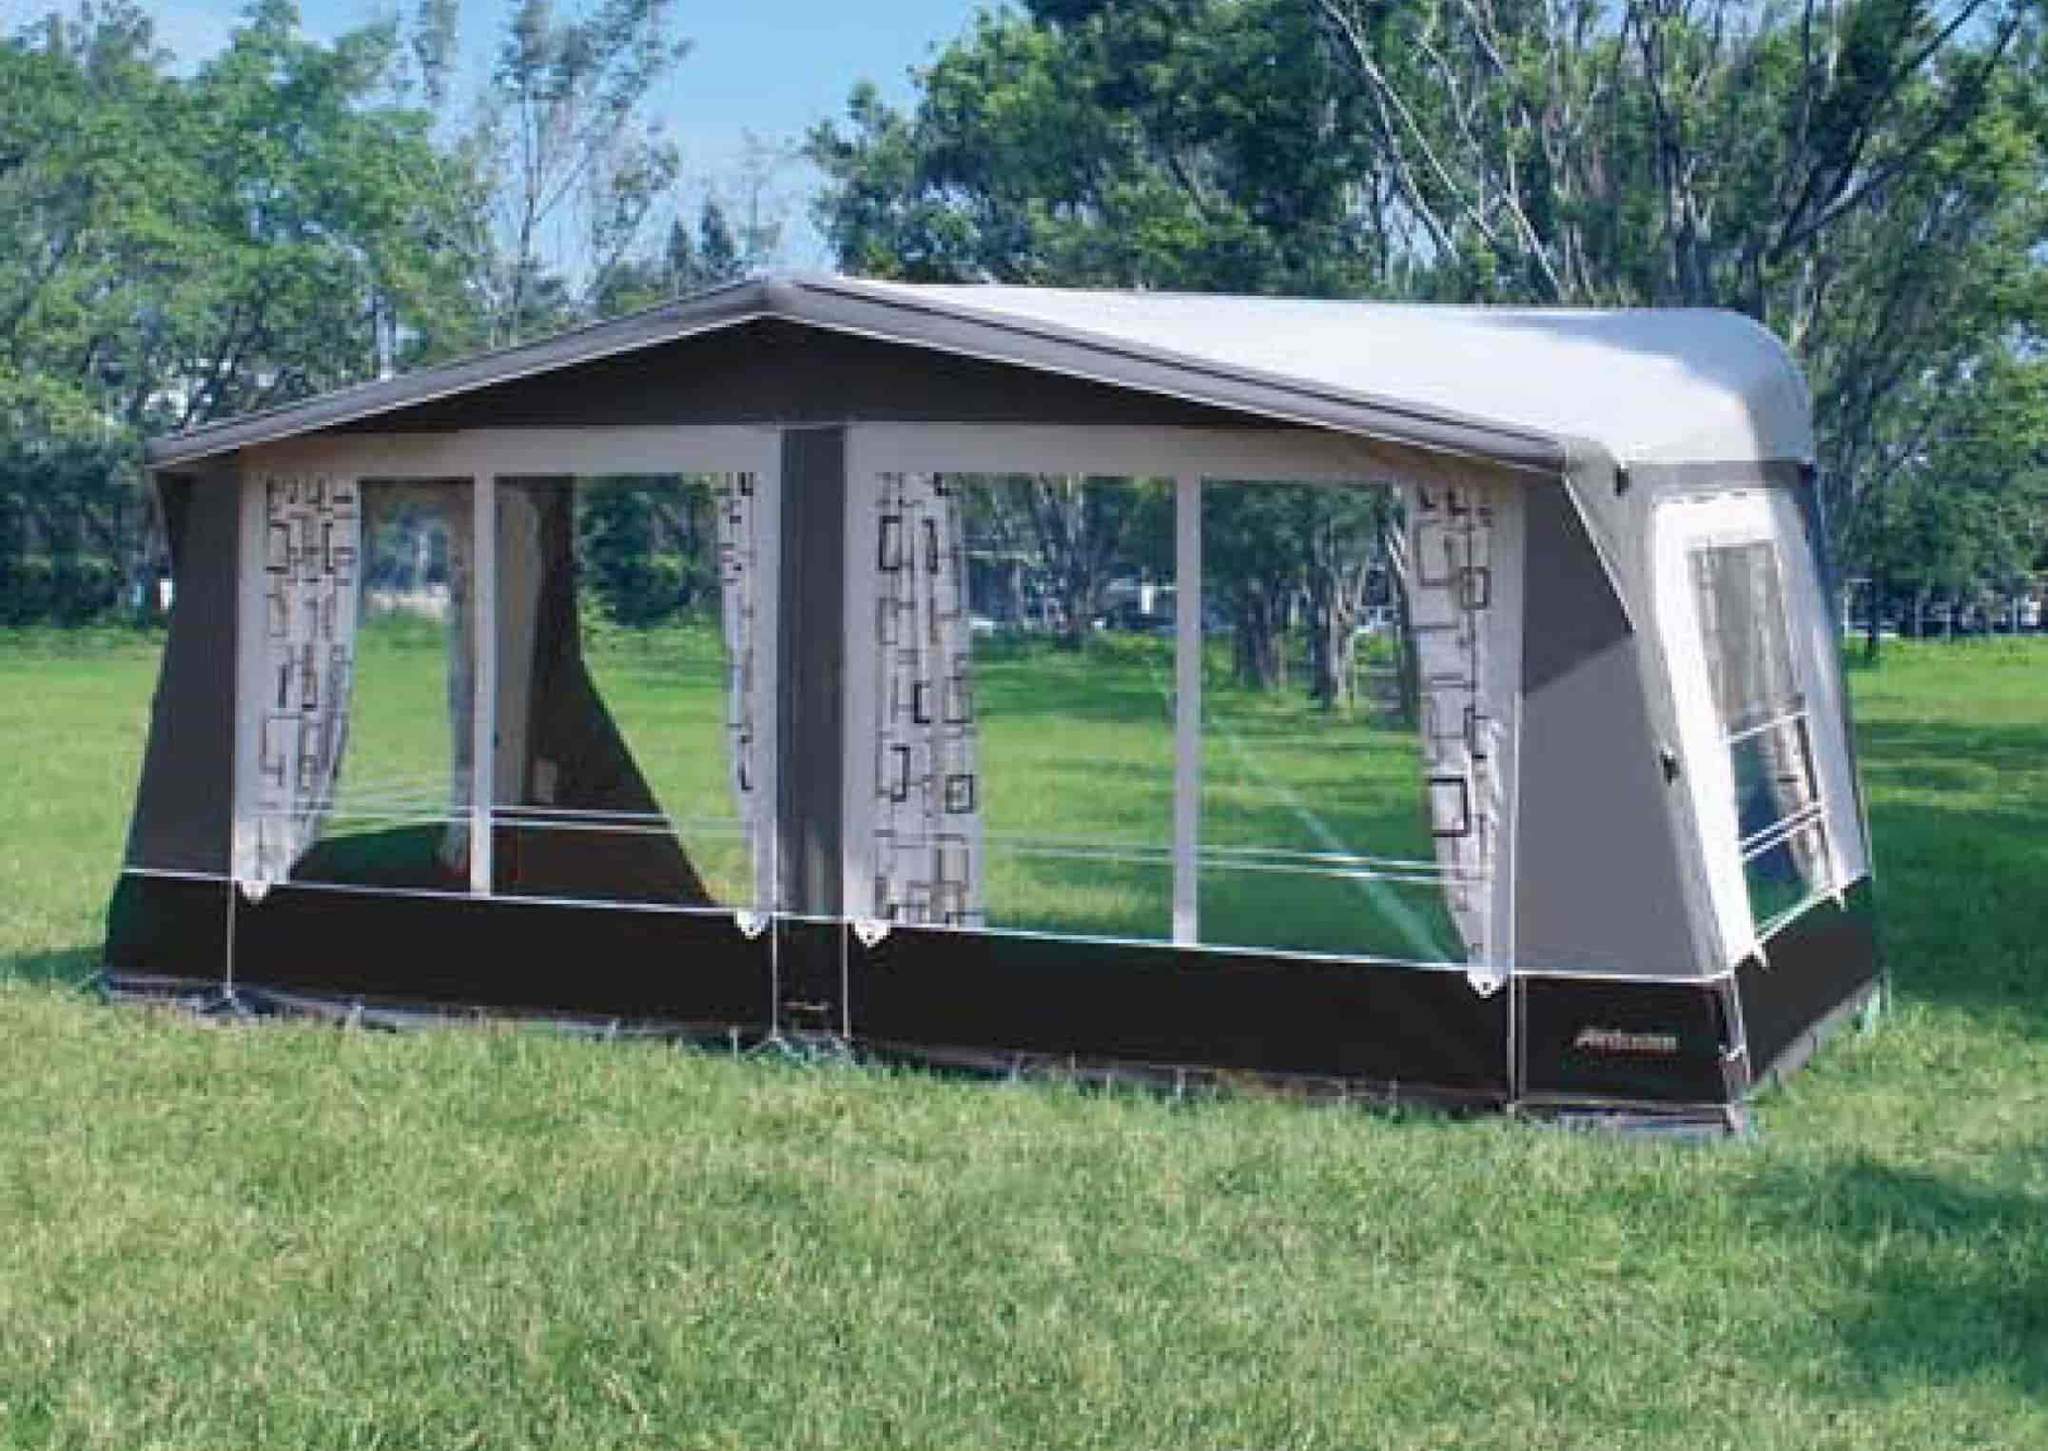 Camptech Kensington Full Traditional Inflatable Air Caravan Awning Free Straps 2019 Min 1024X1024 2X